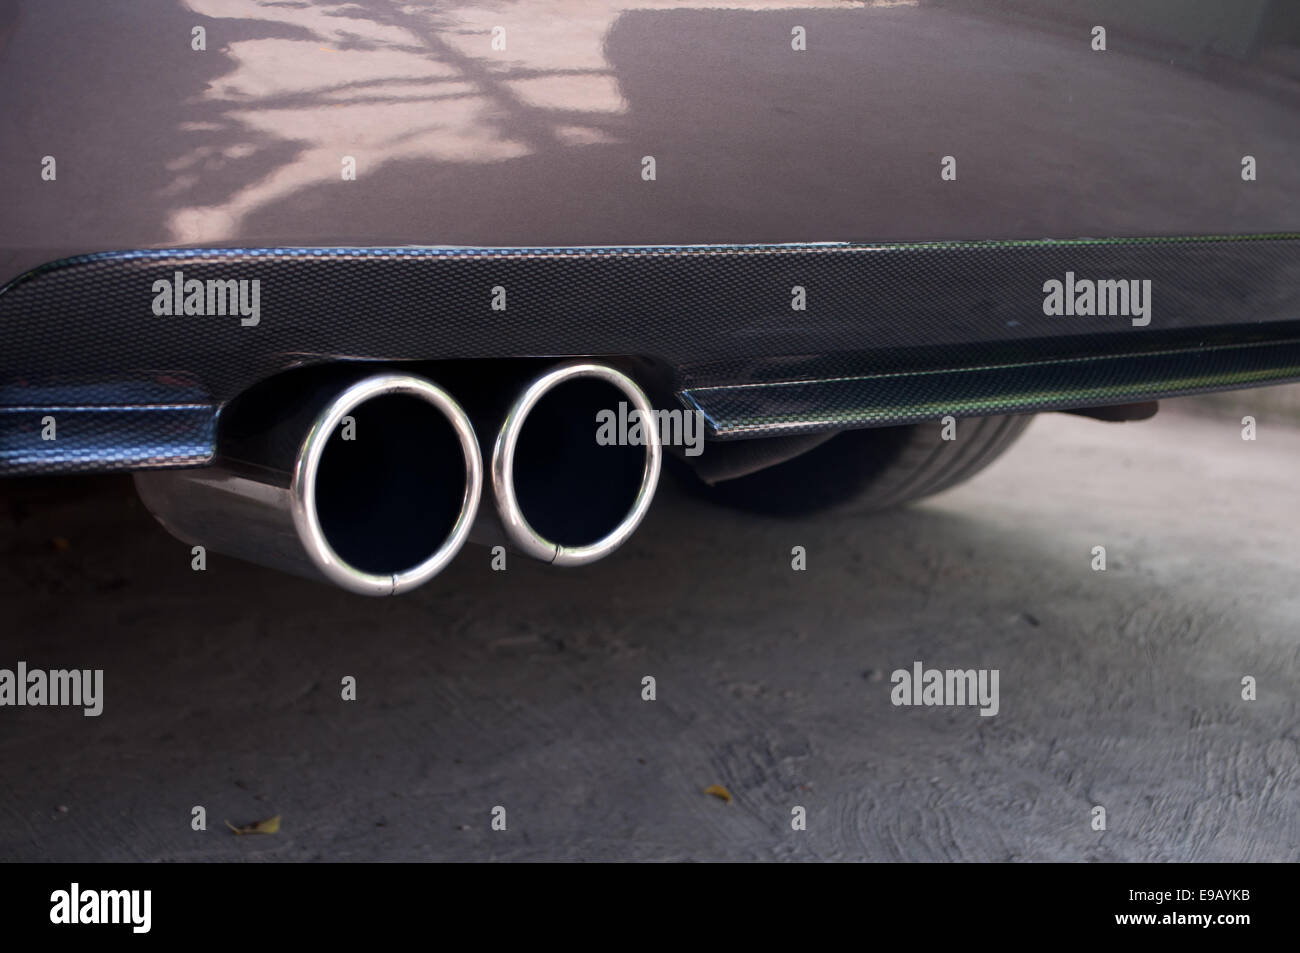 car exhaust pipe Stock Photo